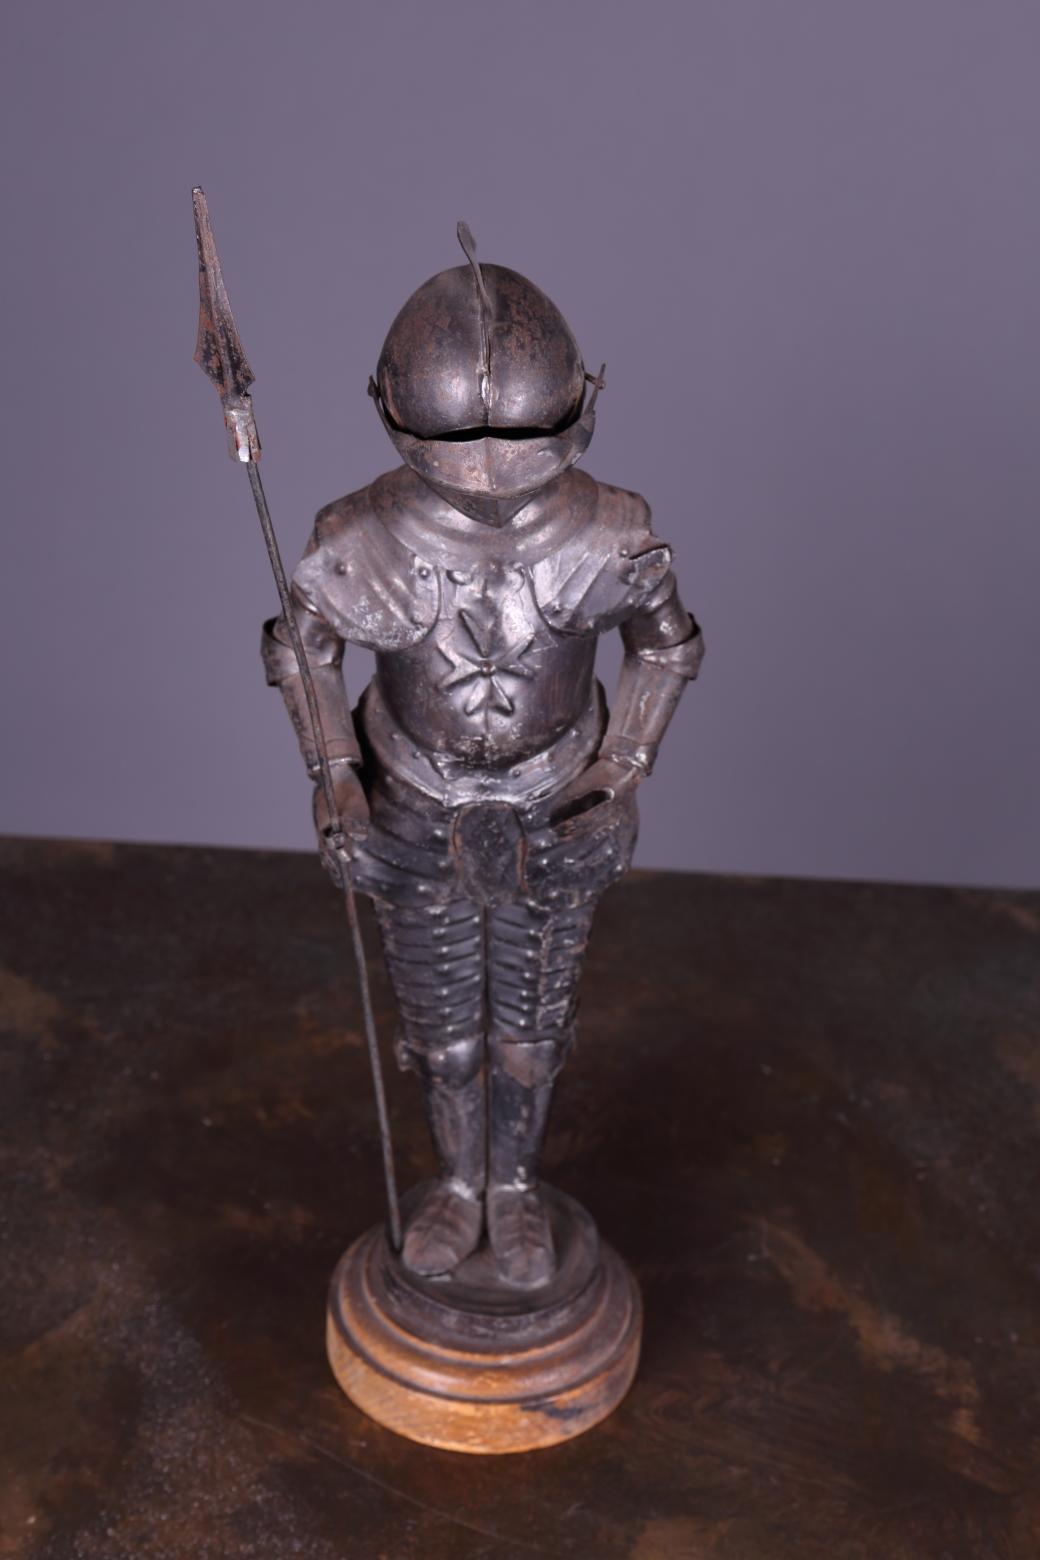 Suit of armour, miniature model of the Knights of Malta.